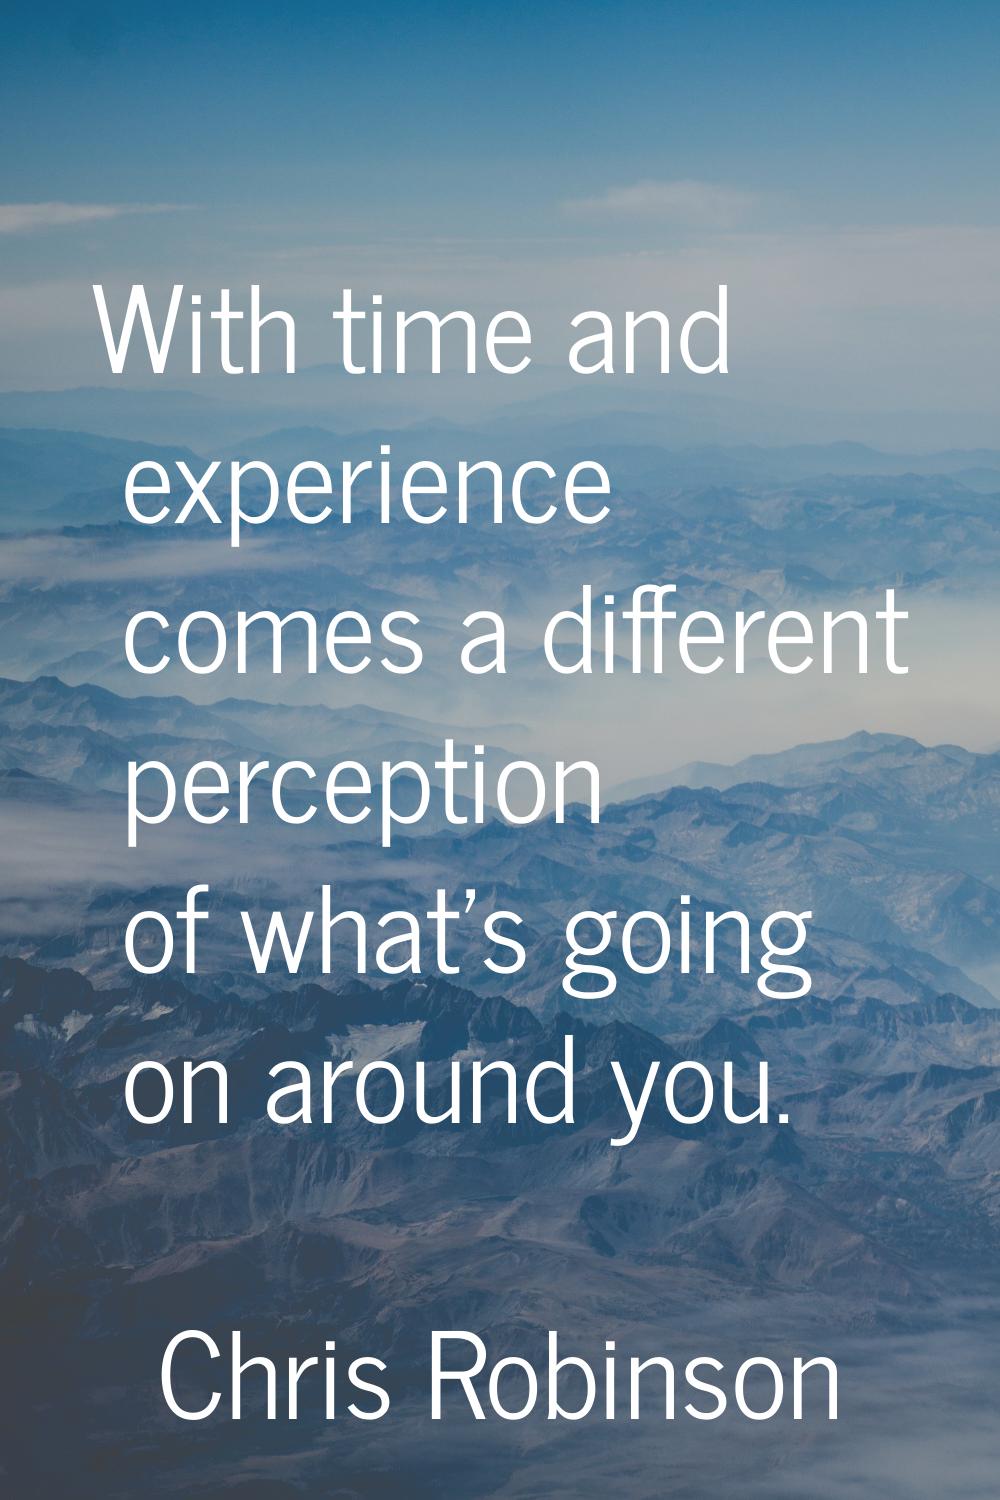 With time and experience comes a different perception of what's going on around you.